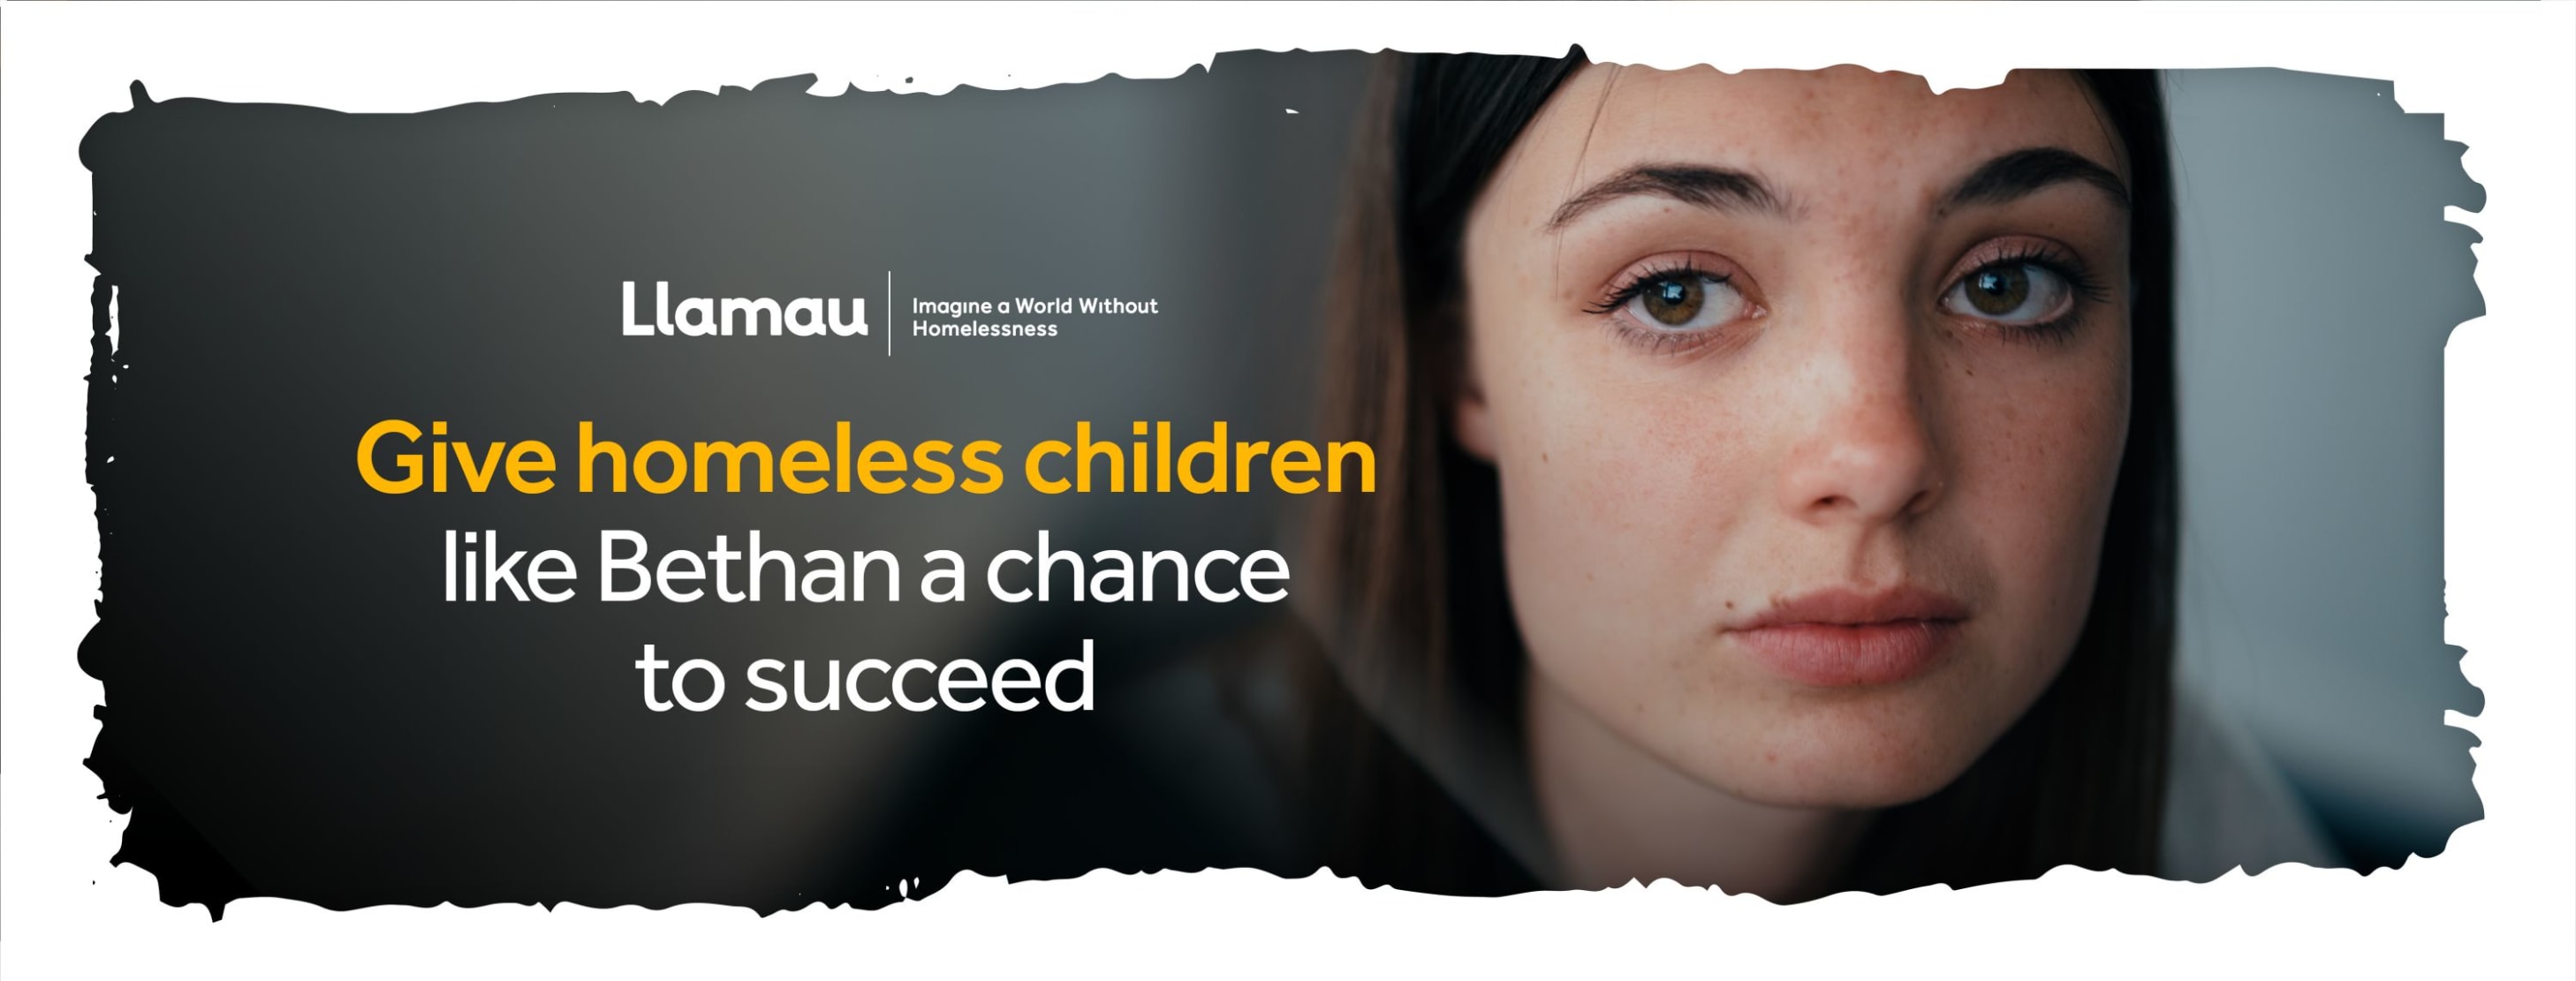 Give a homeless child like Bethan the chance to succeed